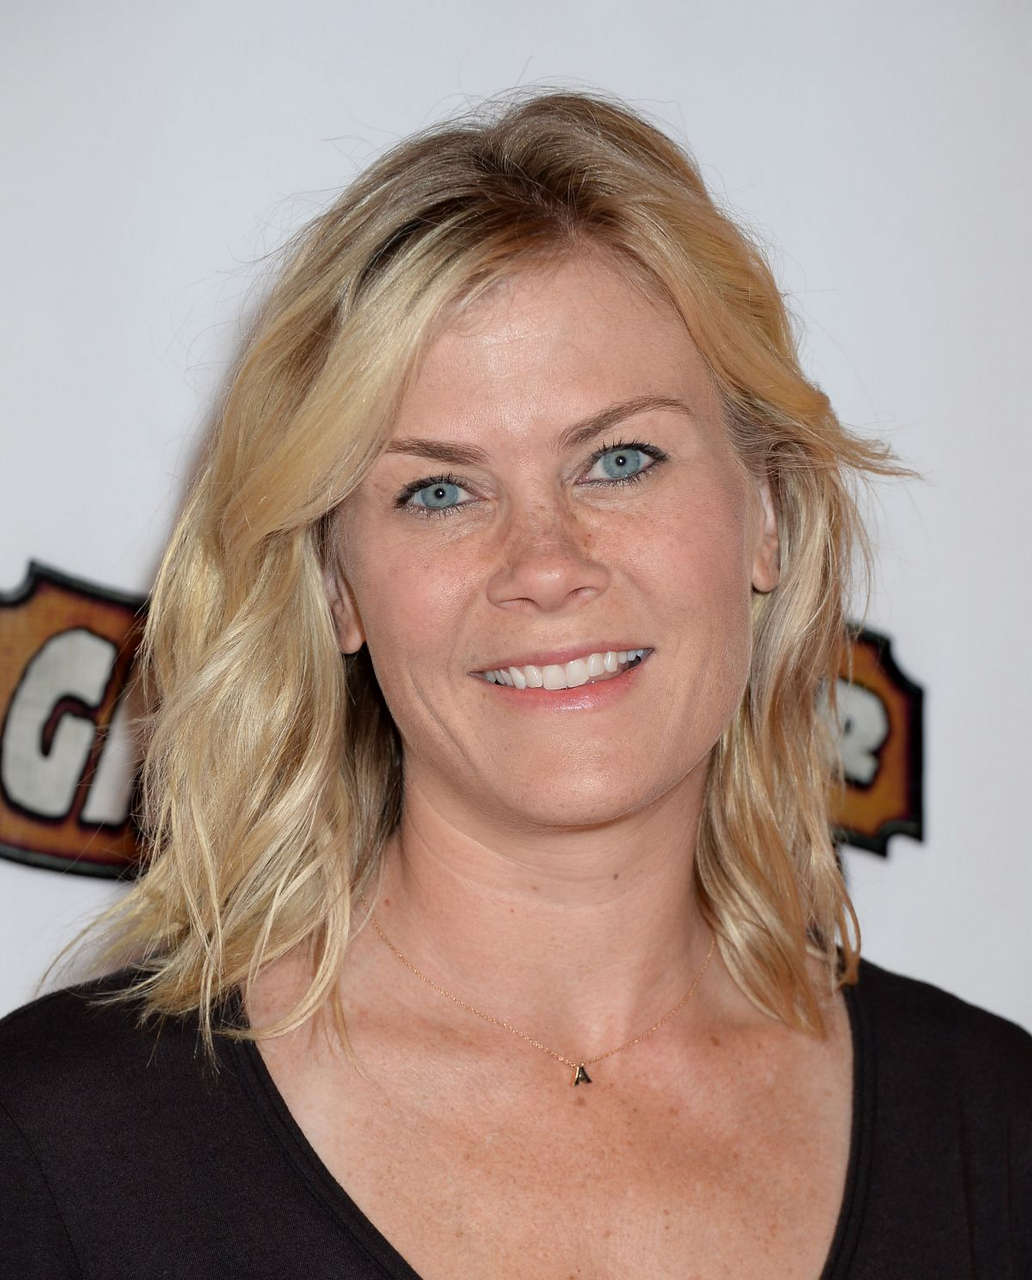 Alison Sweeney Ghost Rider Rides Again Event Knotts Berry Farm Buena Park